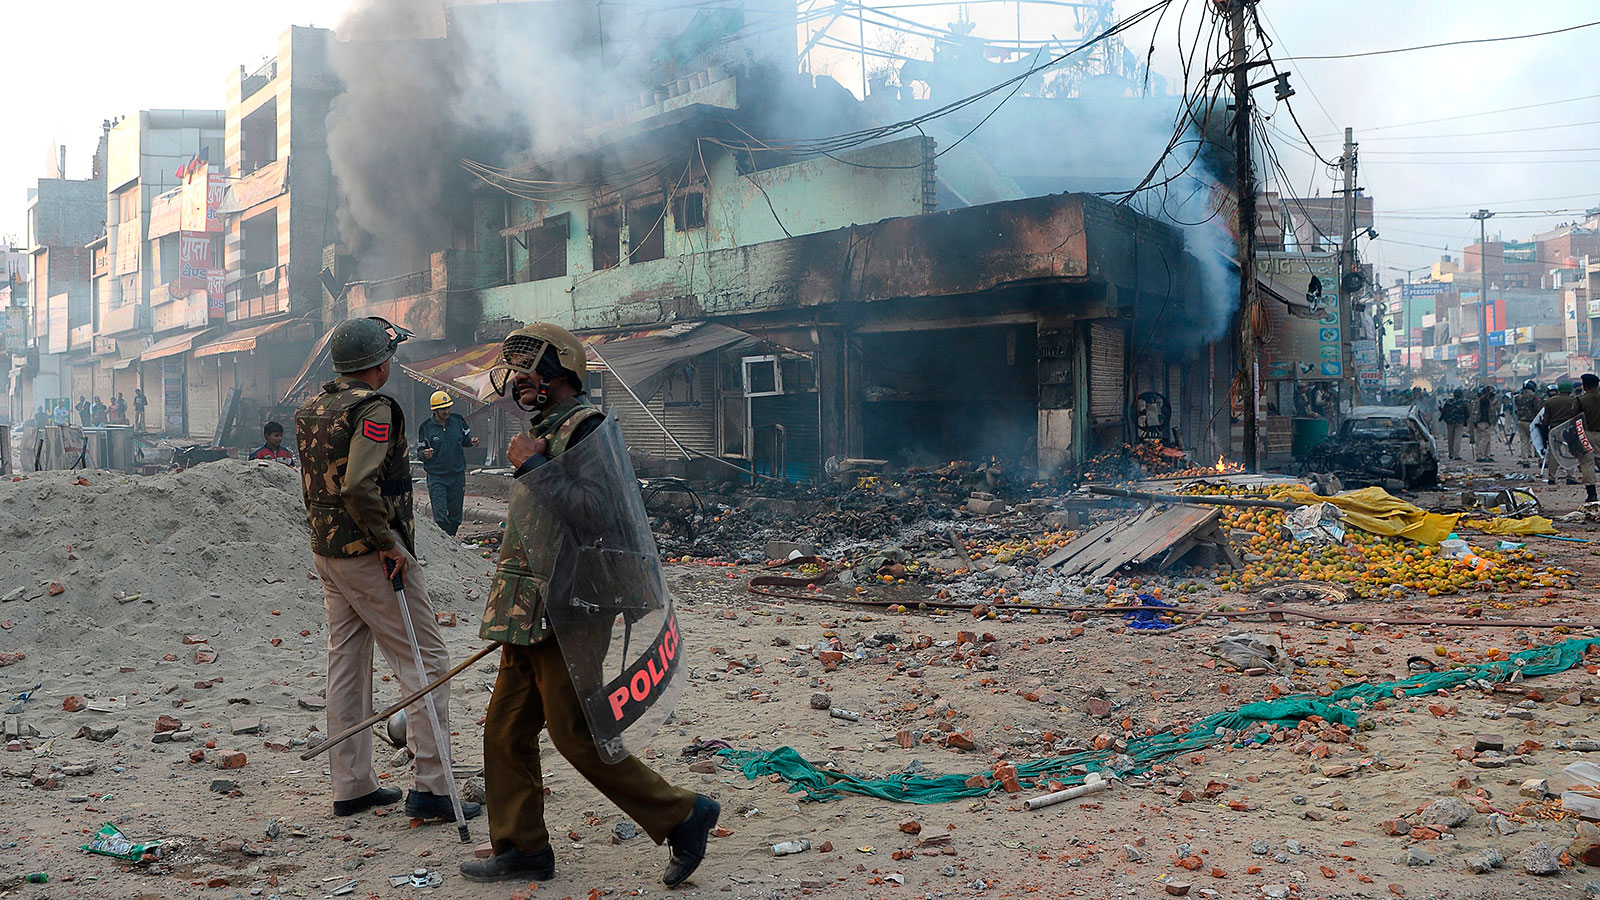 Policeman stand in front of vandalized shops following clashes between supporters and opponents of a new citizenship law in the Bhajanpura area of New Delhi on February 24.